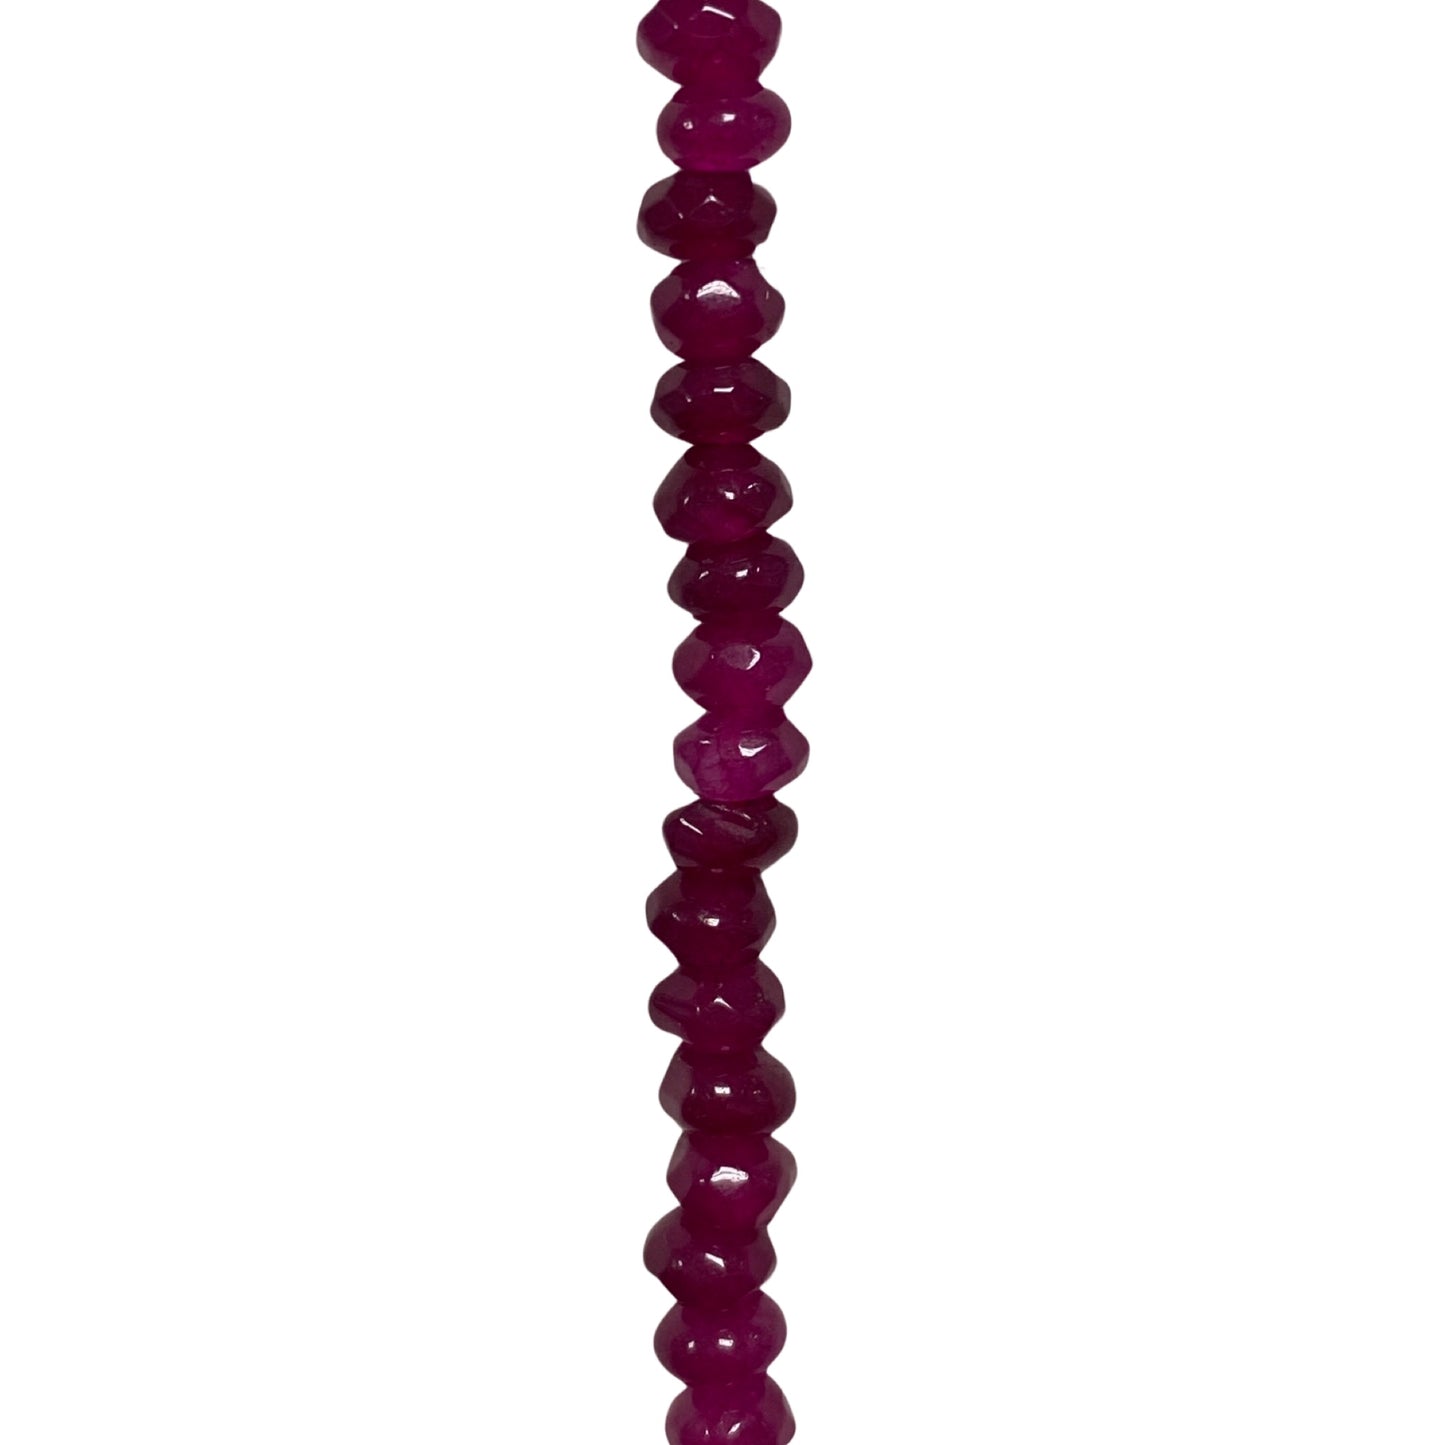 Dyed Jade - (Magenta) - Roundel/ Faceted